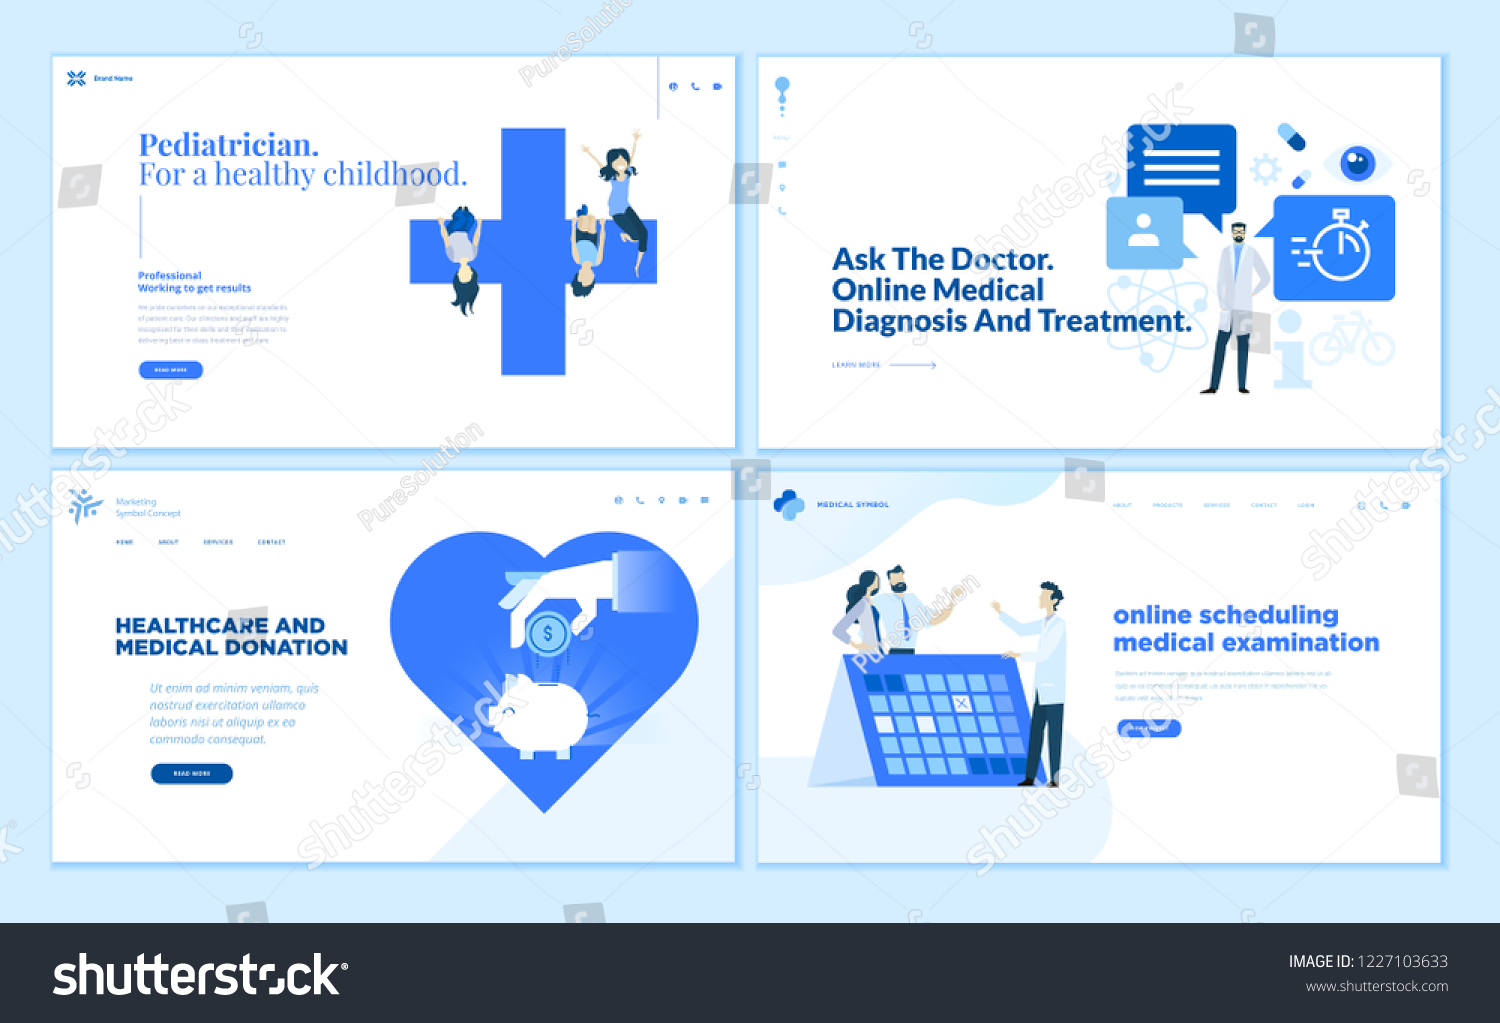 Web page design templates collection of pediatrician, online medical diagnosis and treatment, medical donation. Modern vector illustration concepts for website and mobile website development.  #1227103633